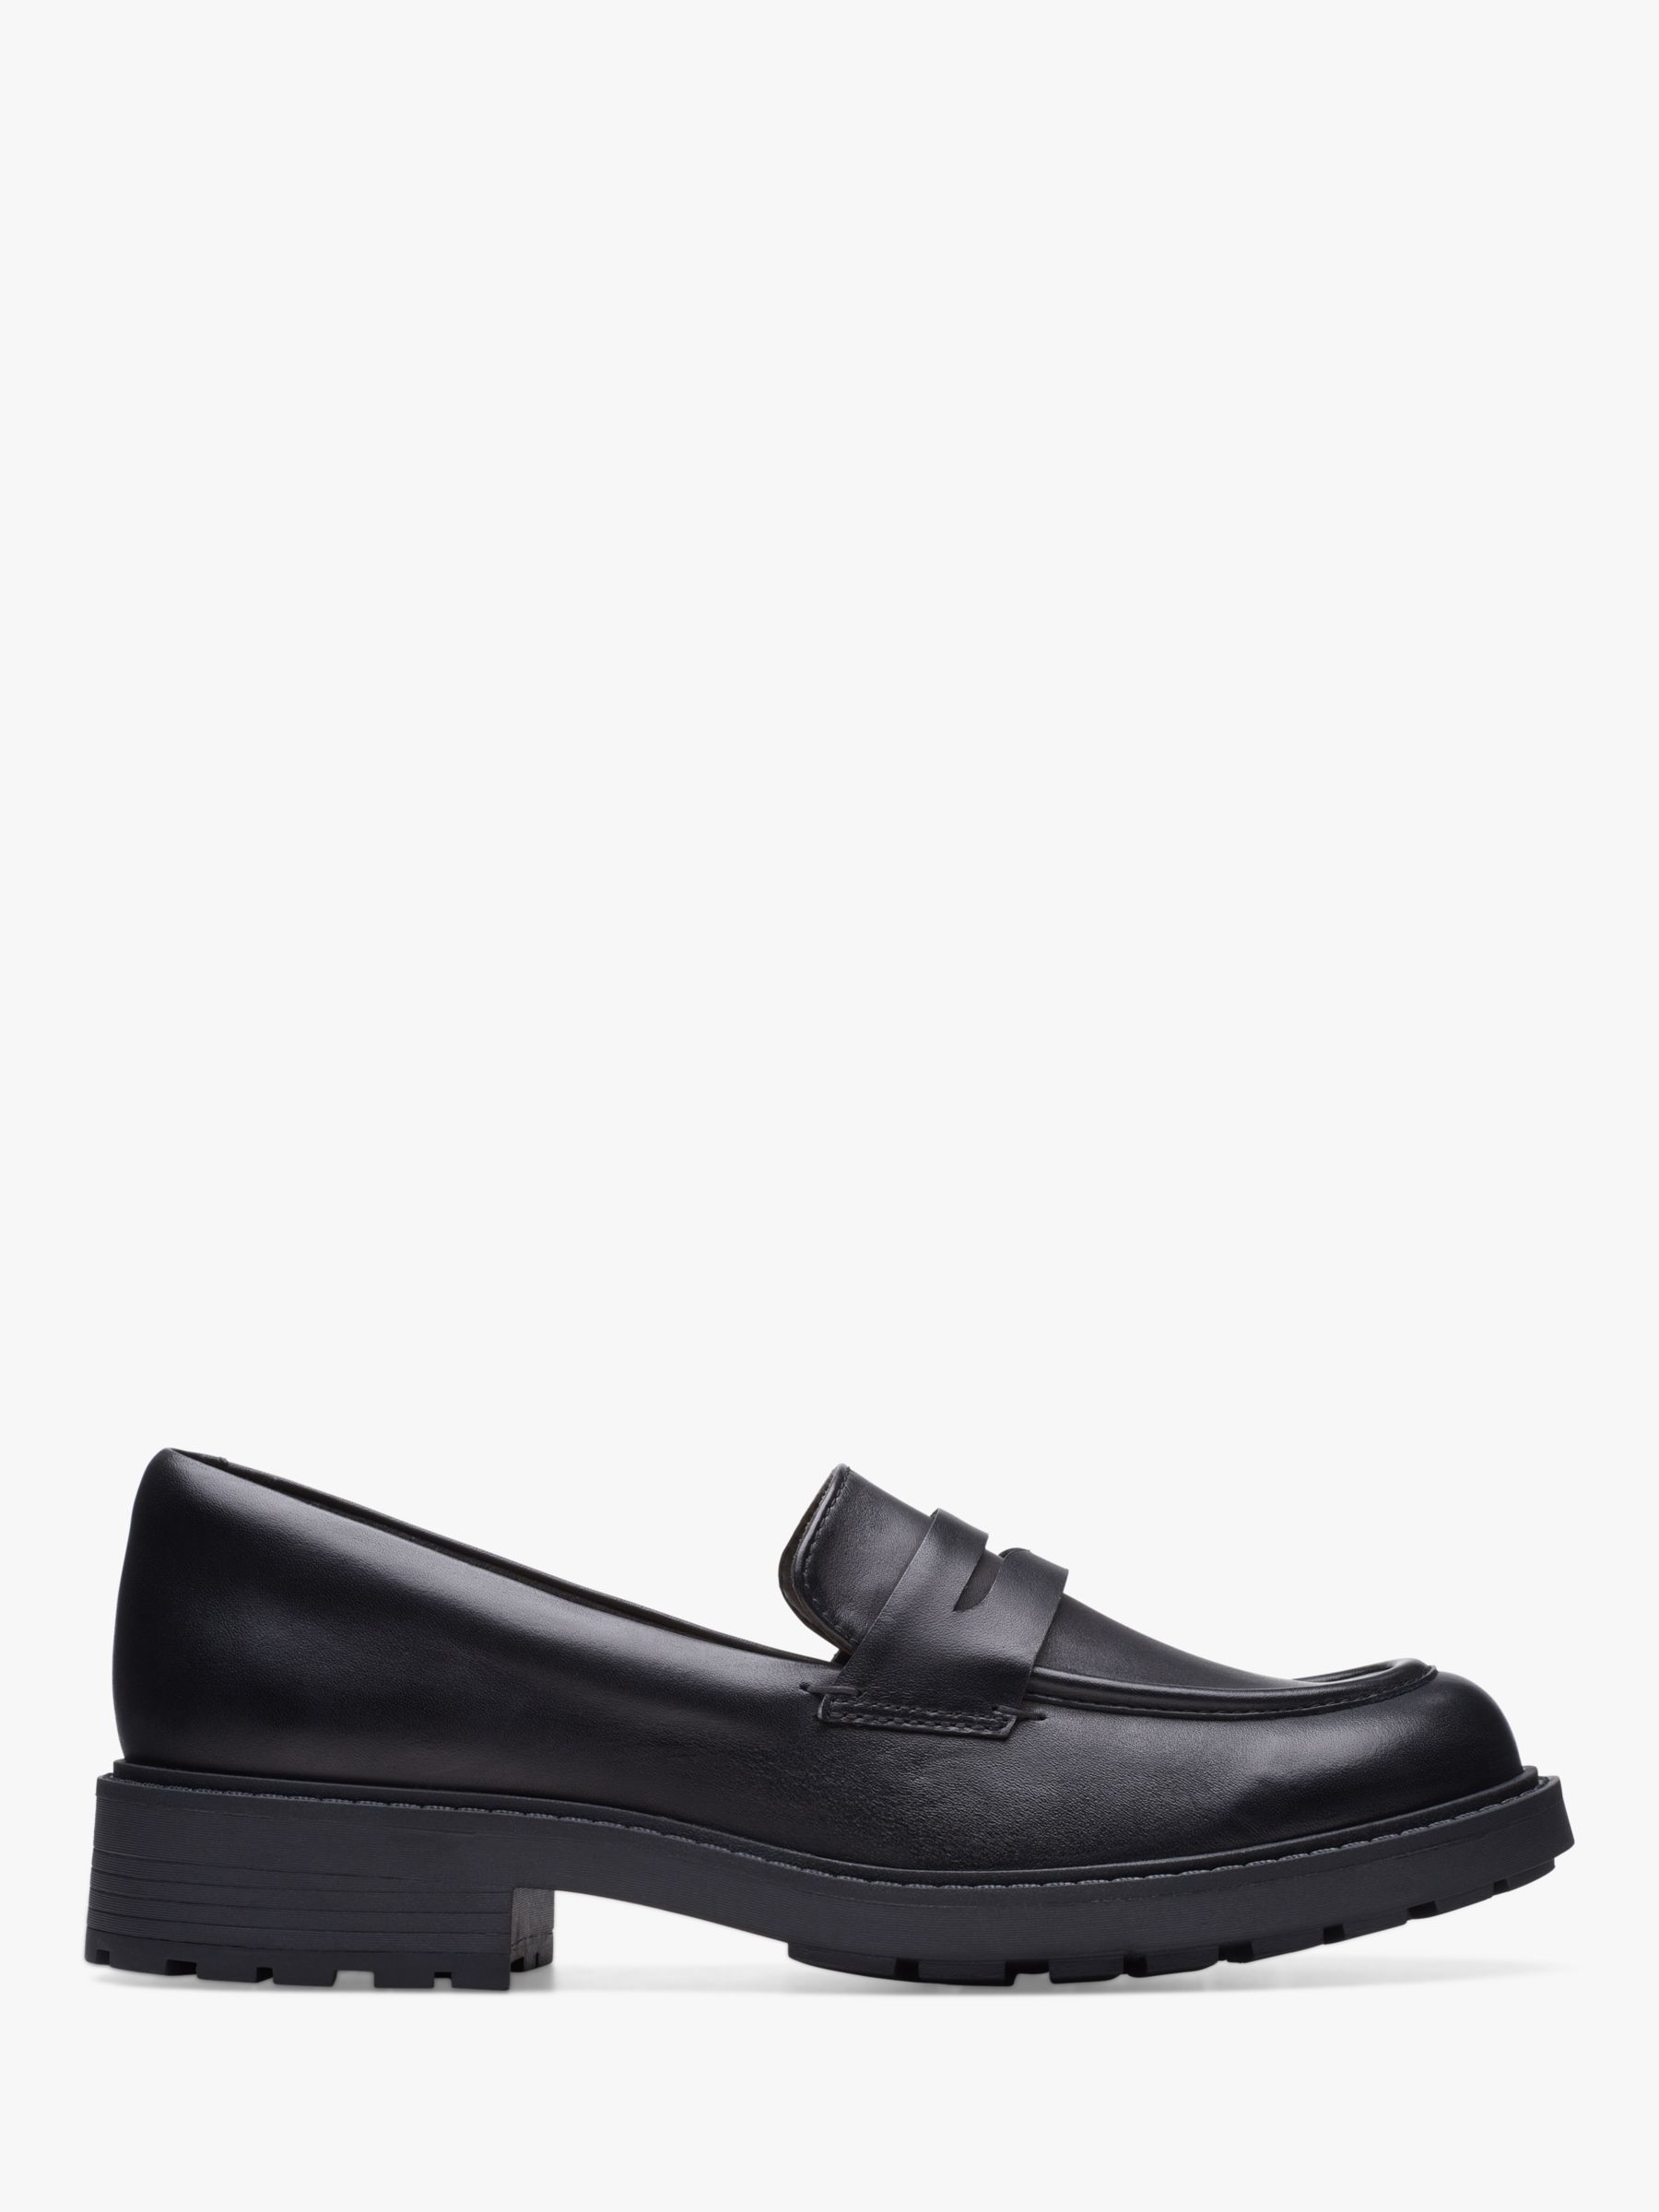 Clarks Orinoco 2 Penny Leather Loafers, Black at John Lewis & Partners